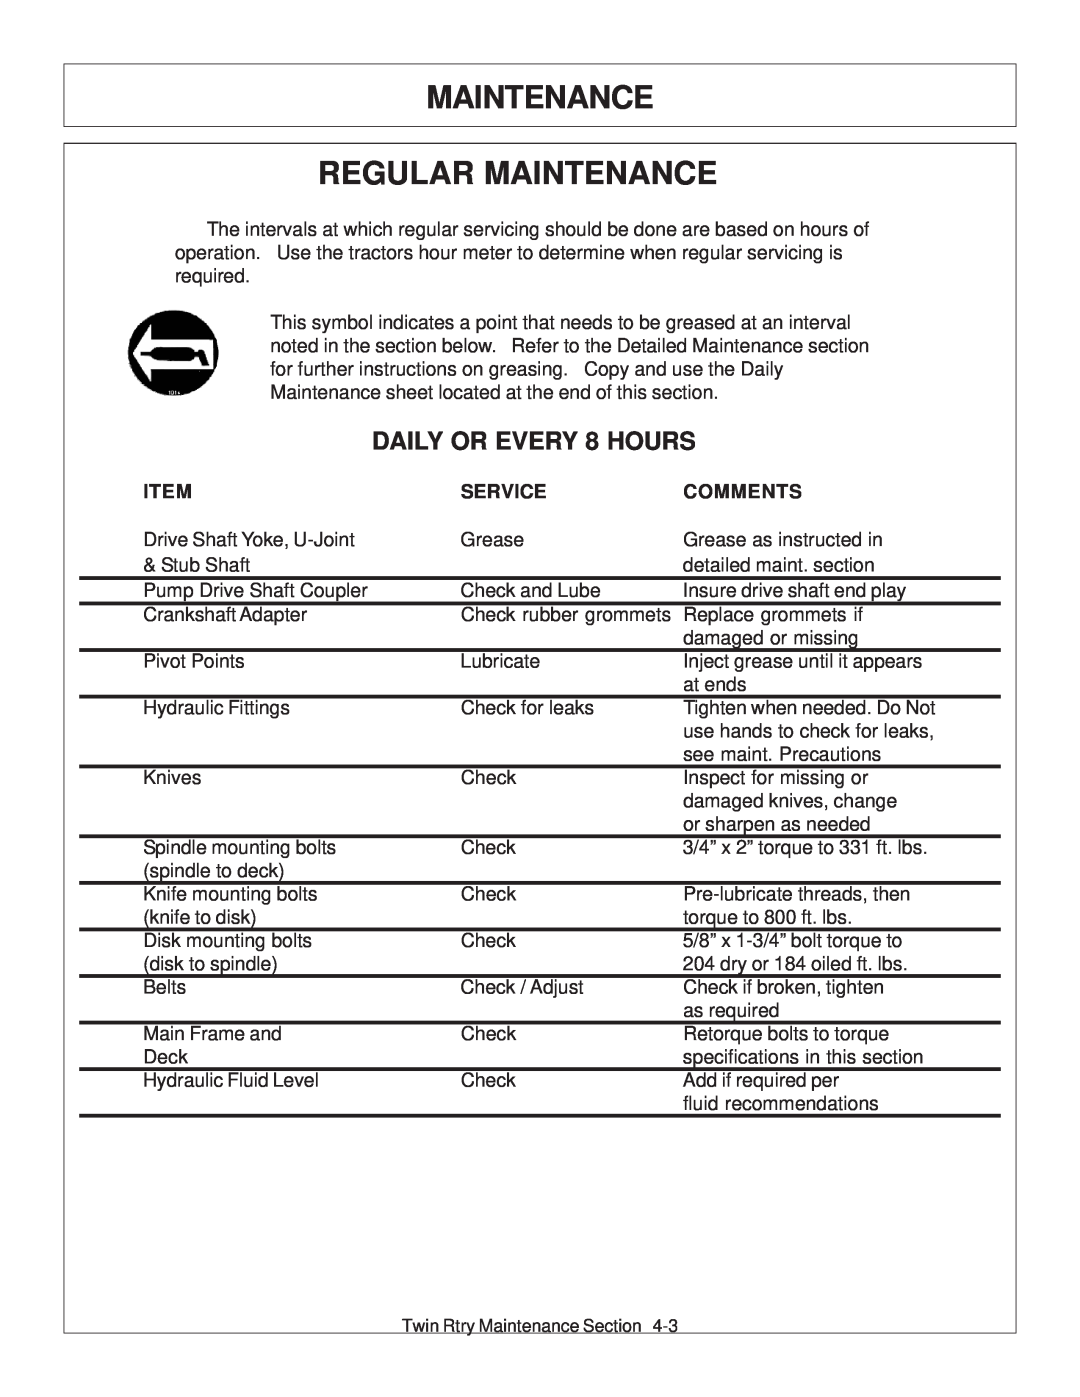 Tiger Products Co., Ltd 6020009 manual Maintenance Regular Maintenance, DAILY OR EVERY 8 HOURS, Service, Comments 